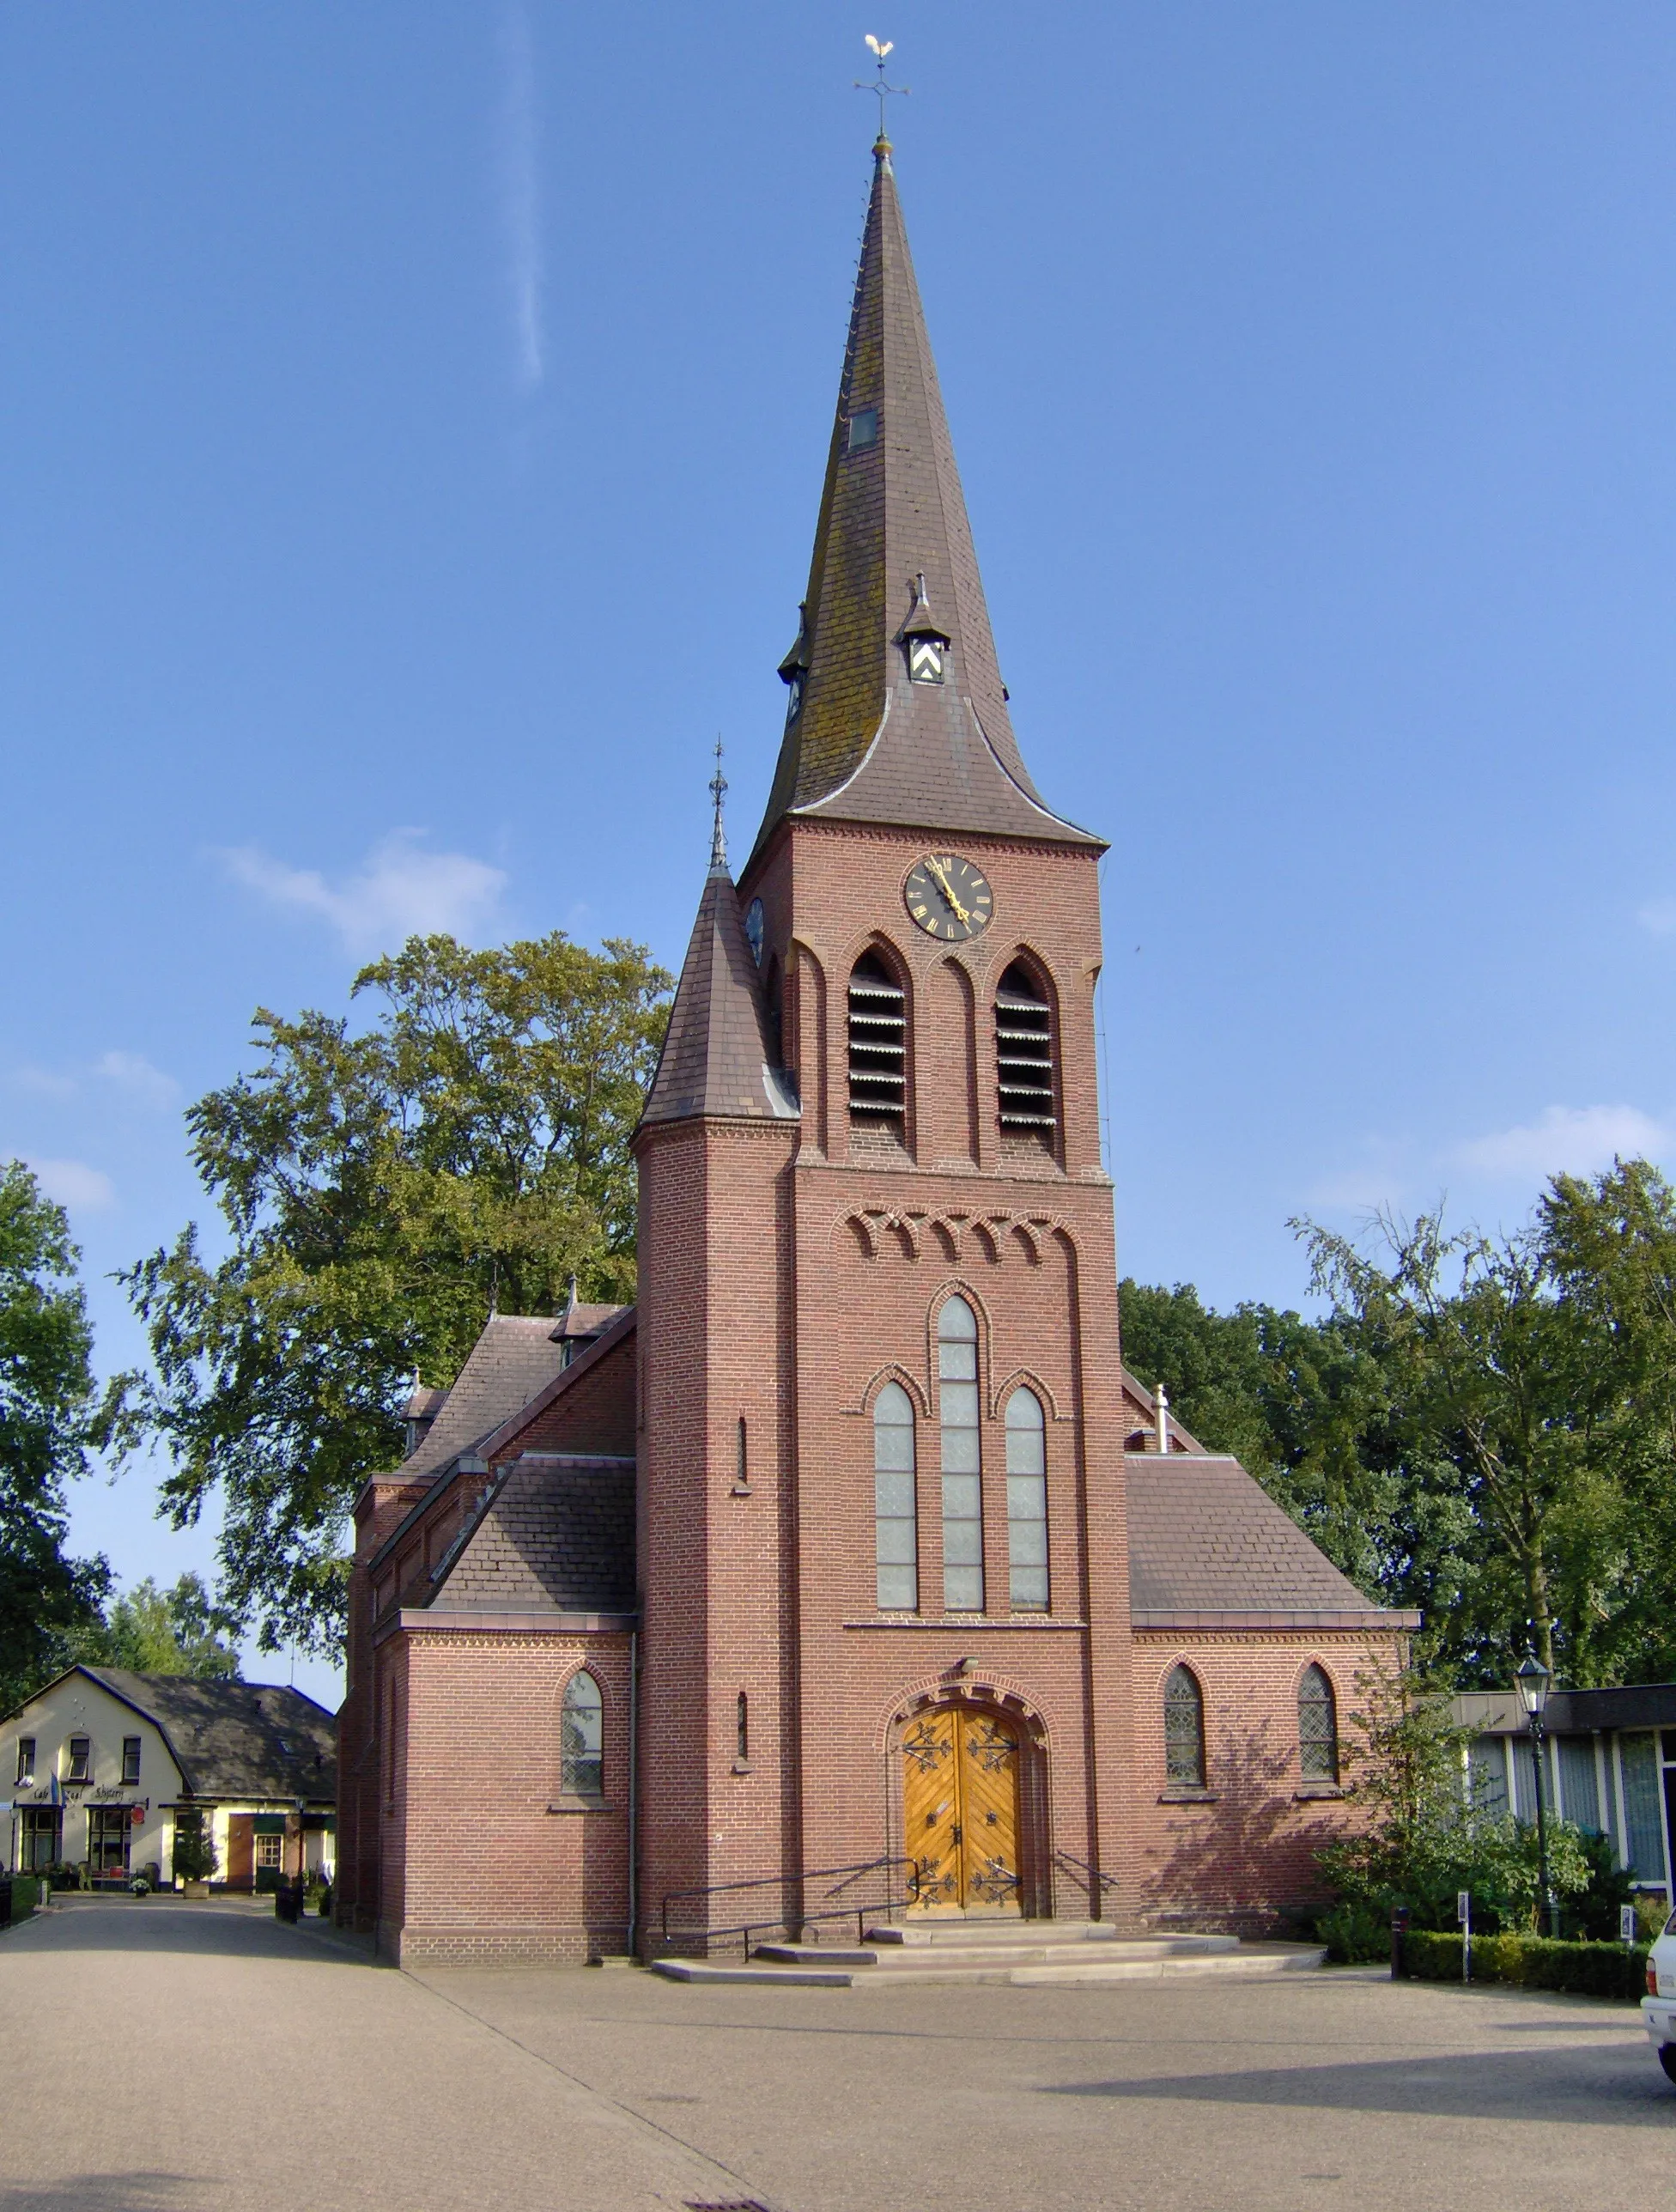 Photo showing: The St. Stephanus Church of Hertme, a little village in the municipality of Borne, Netherlands; built in 1903, design by Wolter te Riele